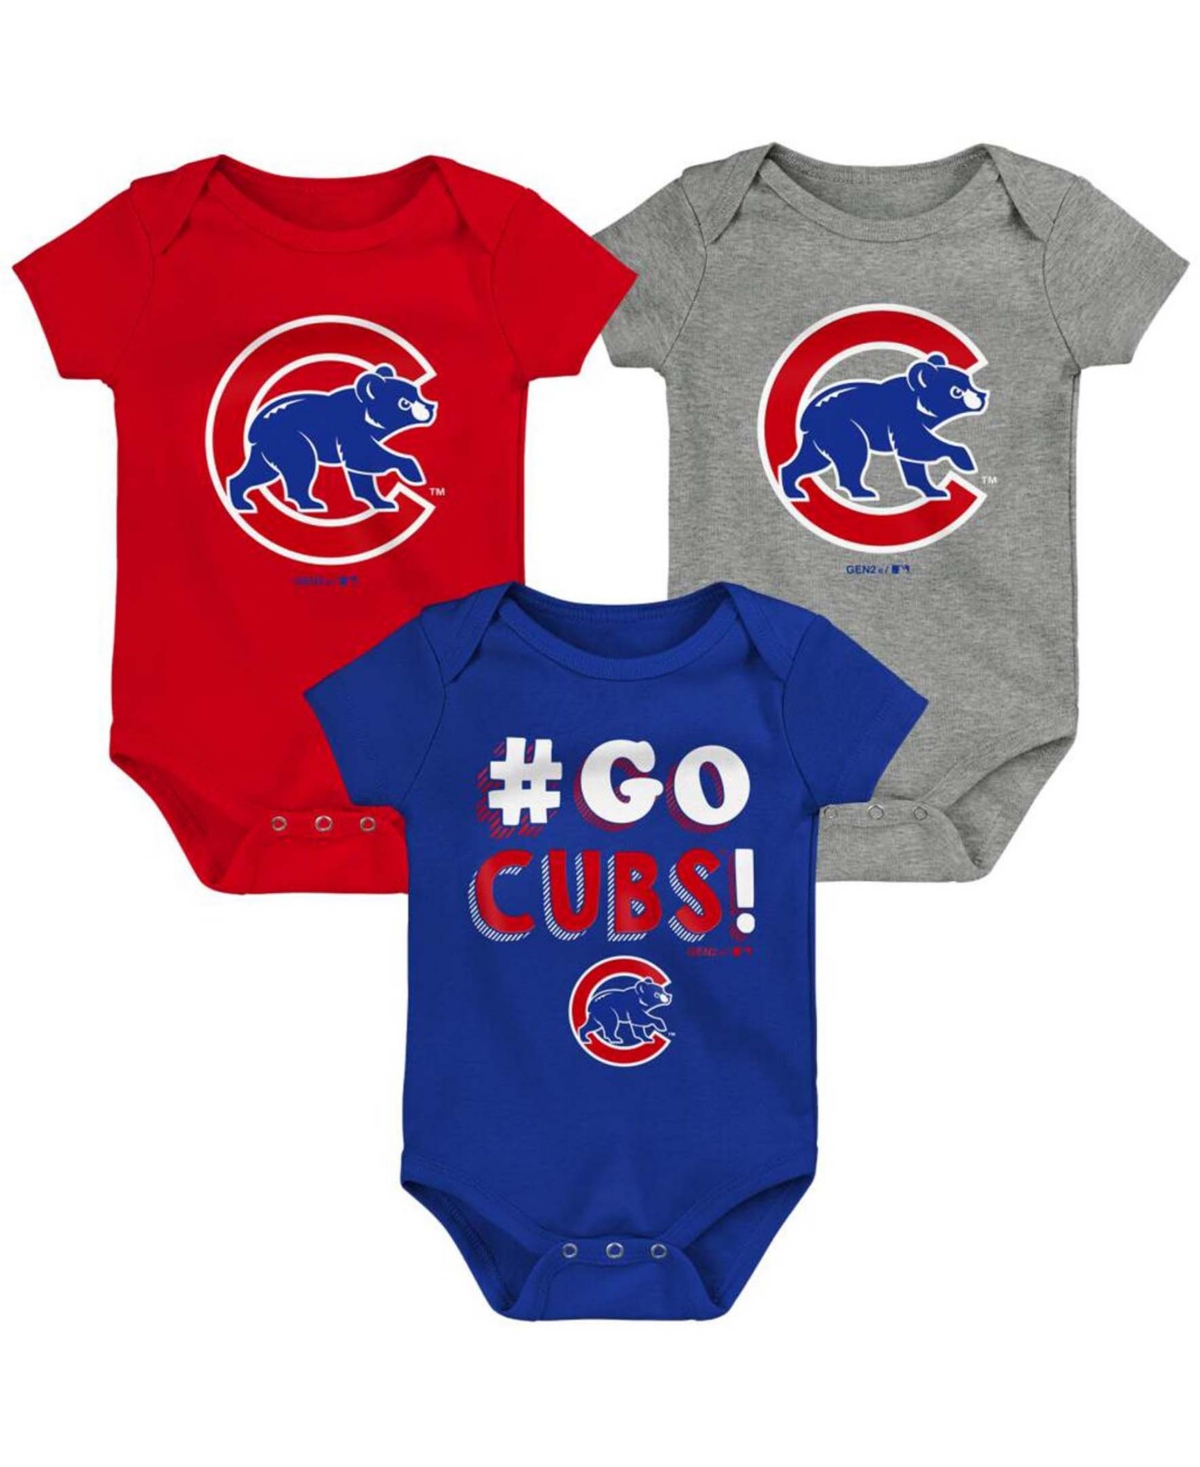 Outerstuff Babies' Infant Boys And Girls Royal, Red, Gray Chicago Cubs Born To Win Bodysuit Set, 3 Pack In Royal,red,gray